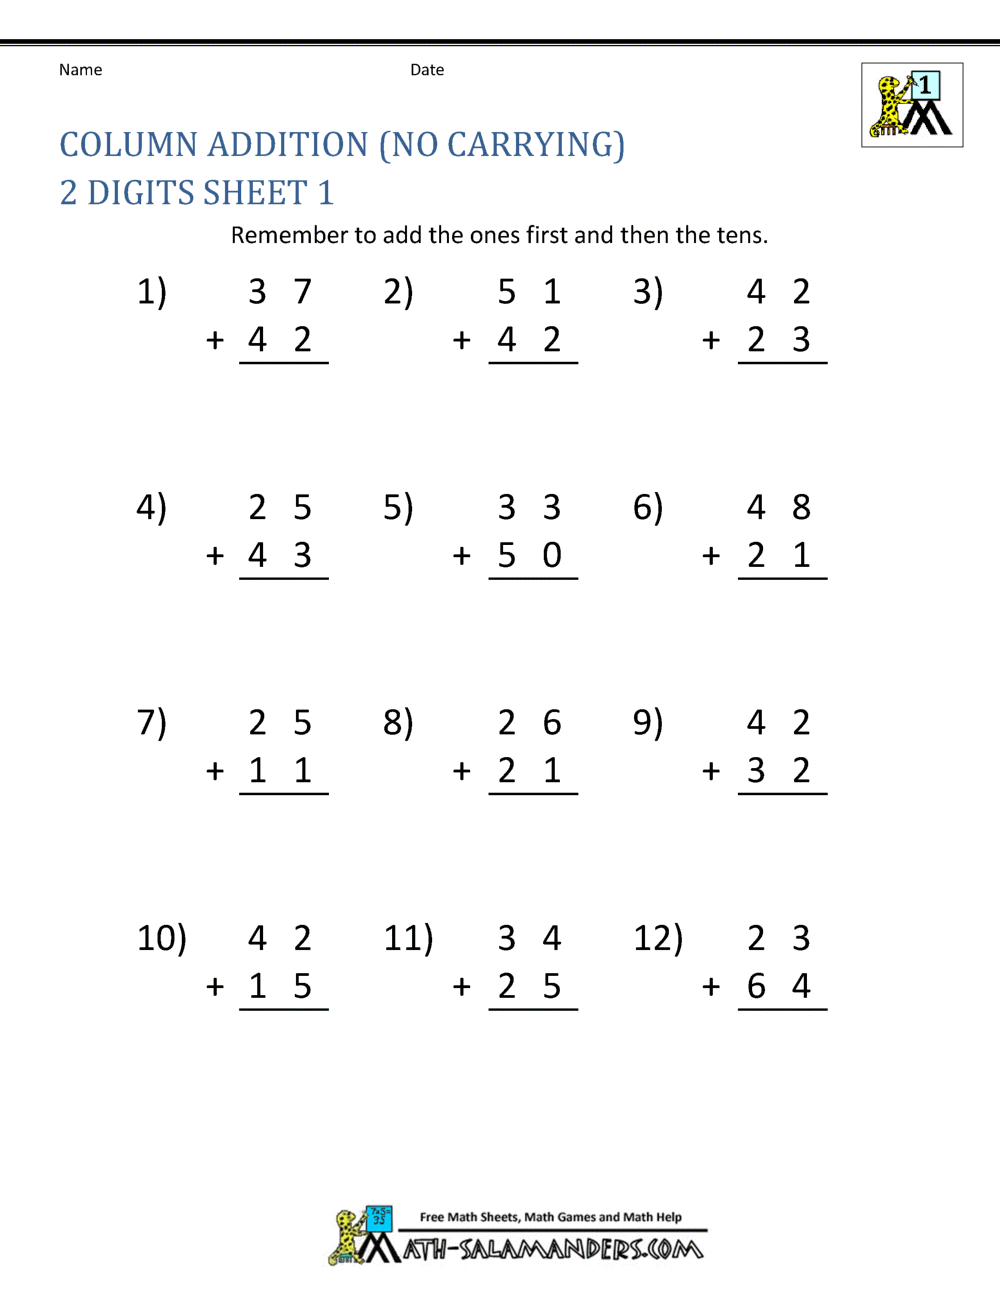 math worksheets for grade 1 addition and subtraction pdf